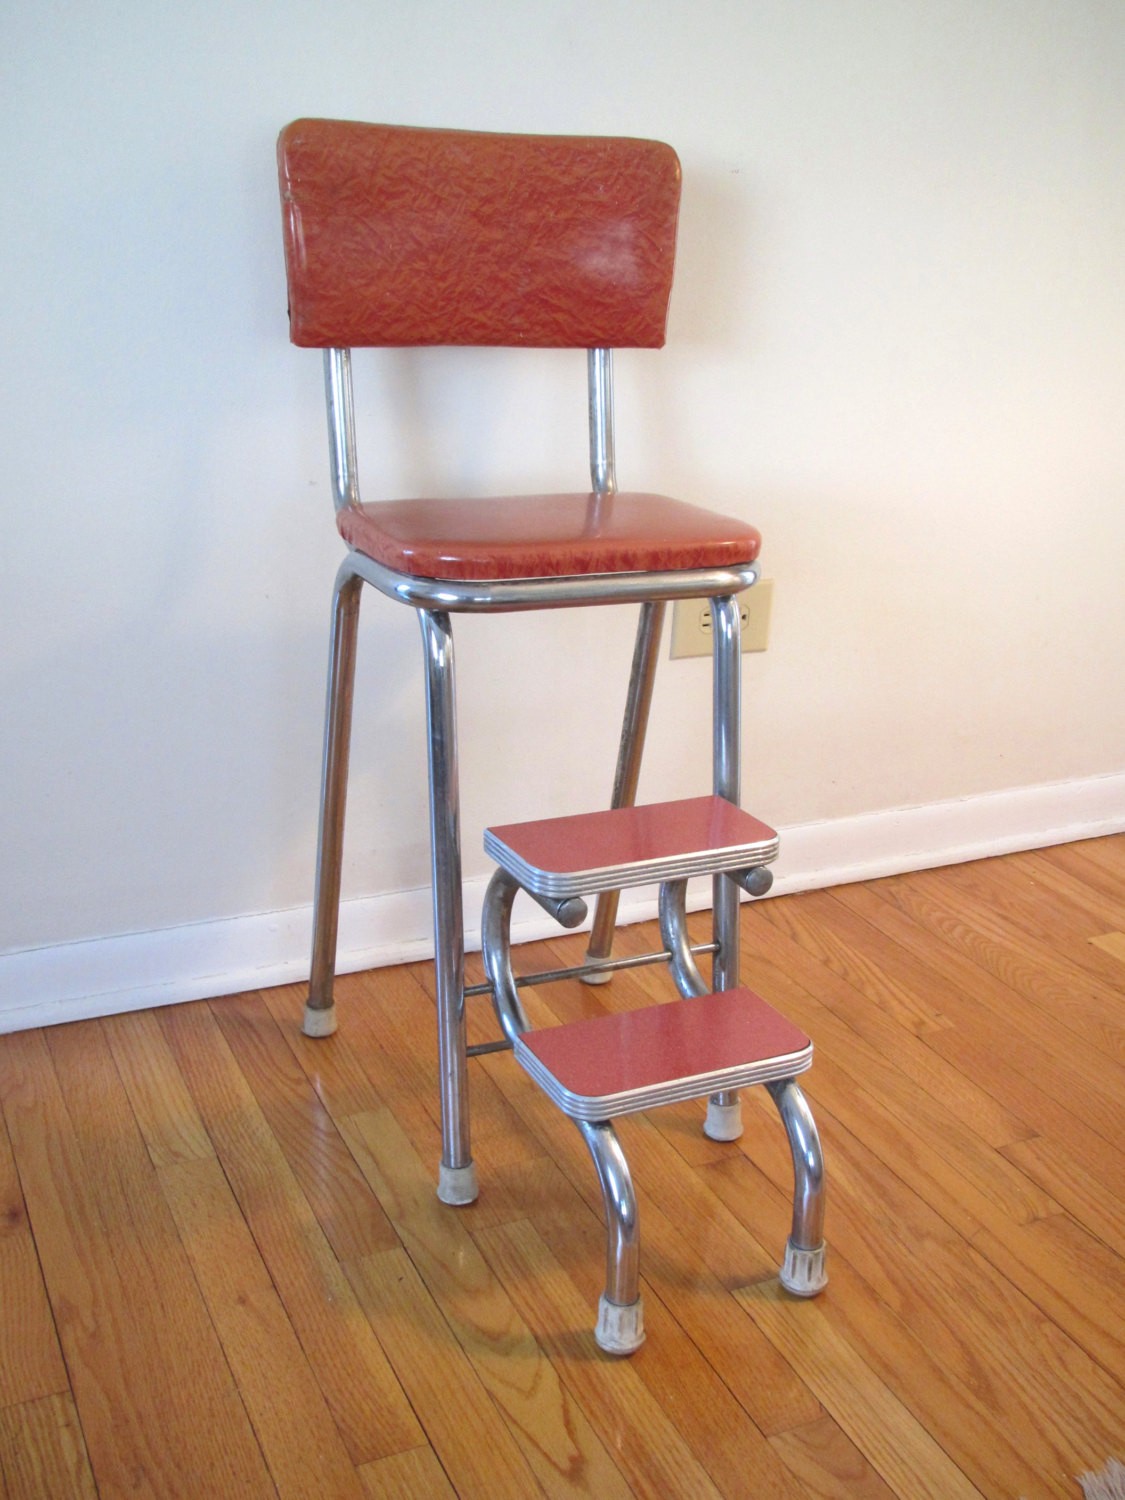 Vintage stool coral and chrome kitchen cosco style